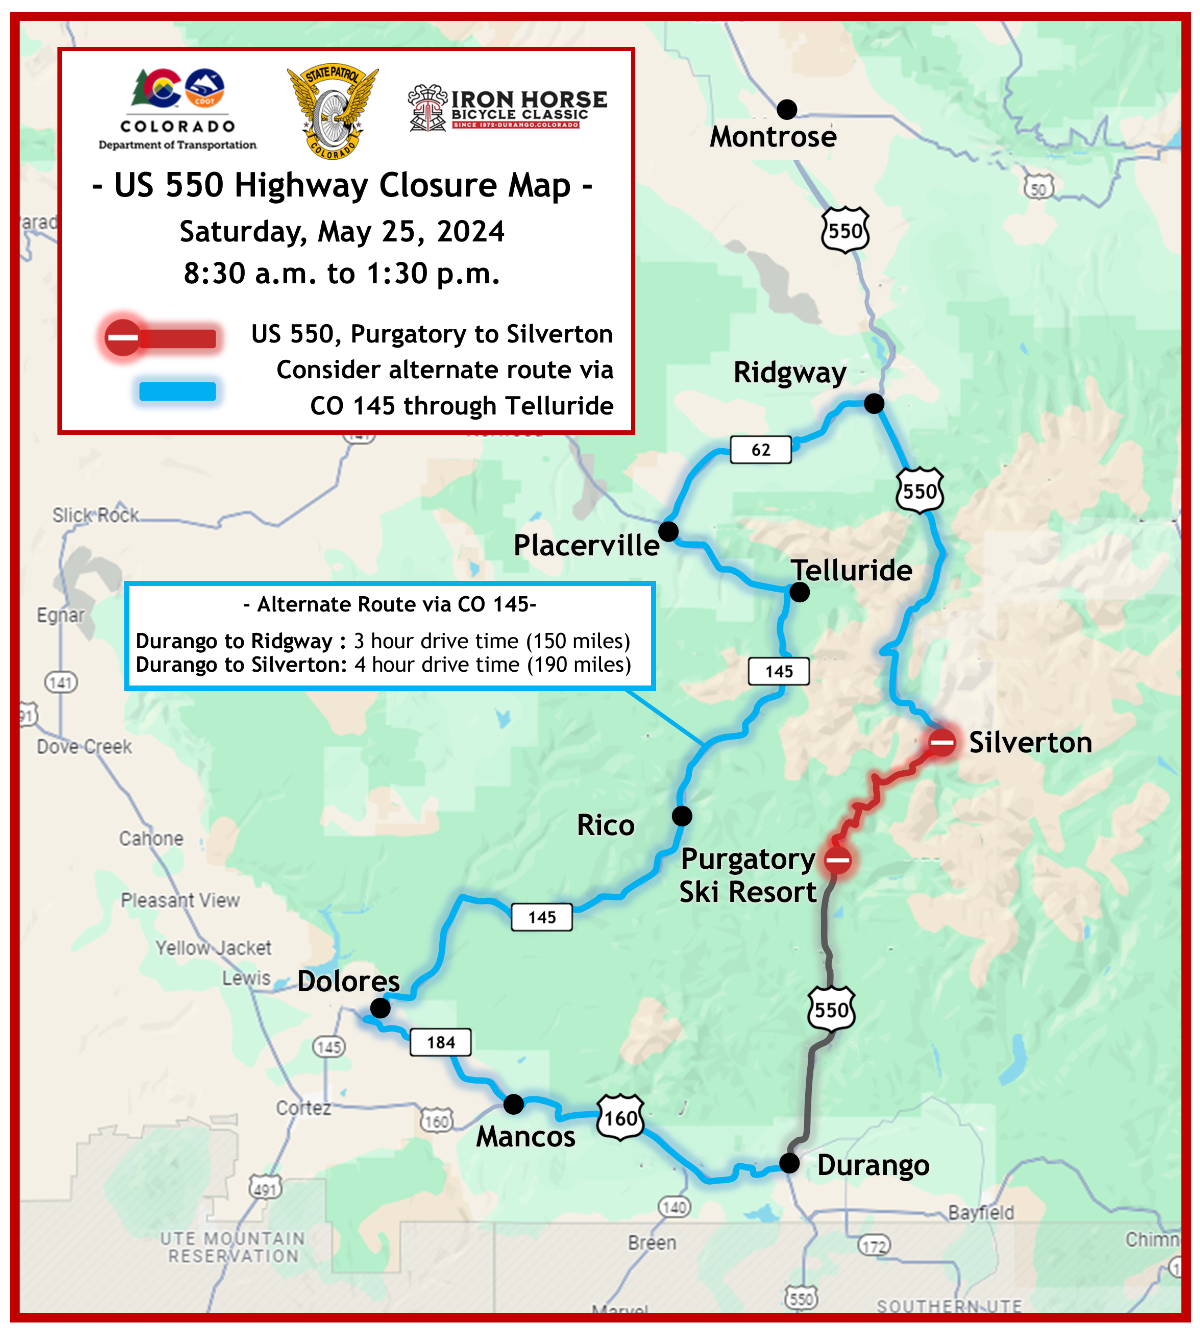 map_of_us550_closure_during_2024_iron_horse_bicycle_classic.png detail image